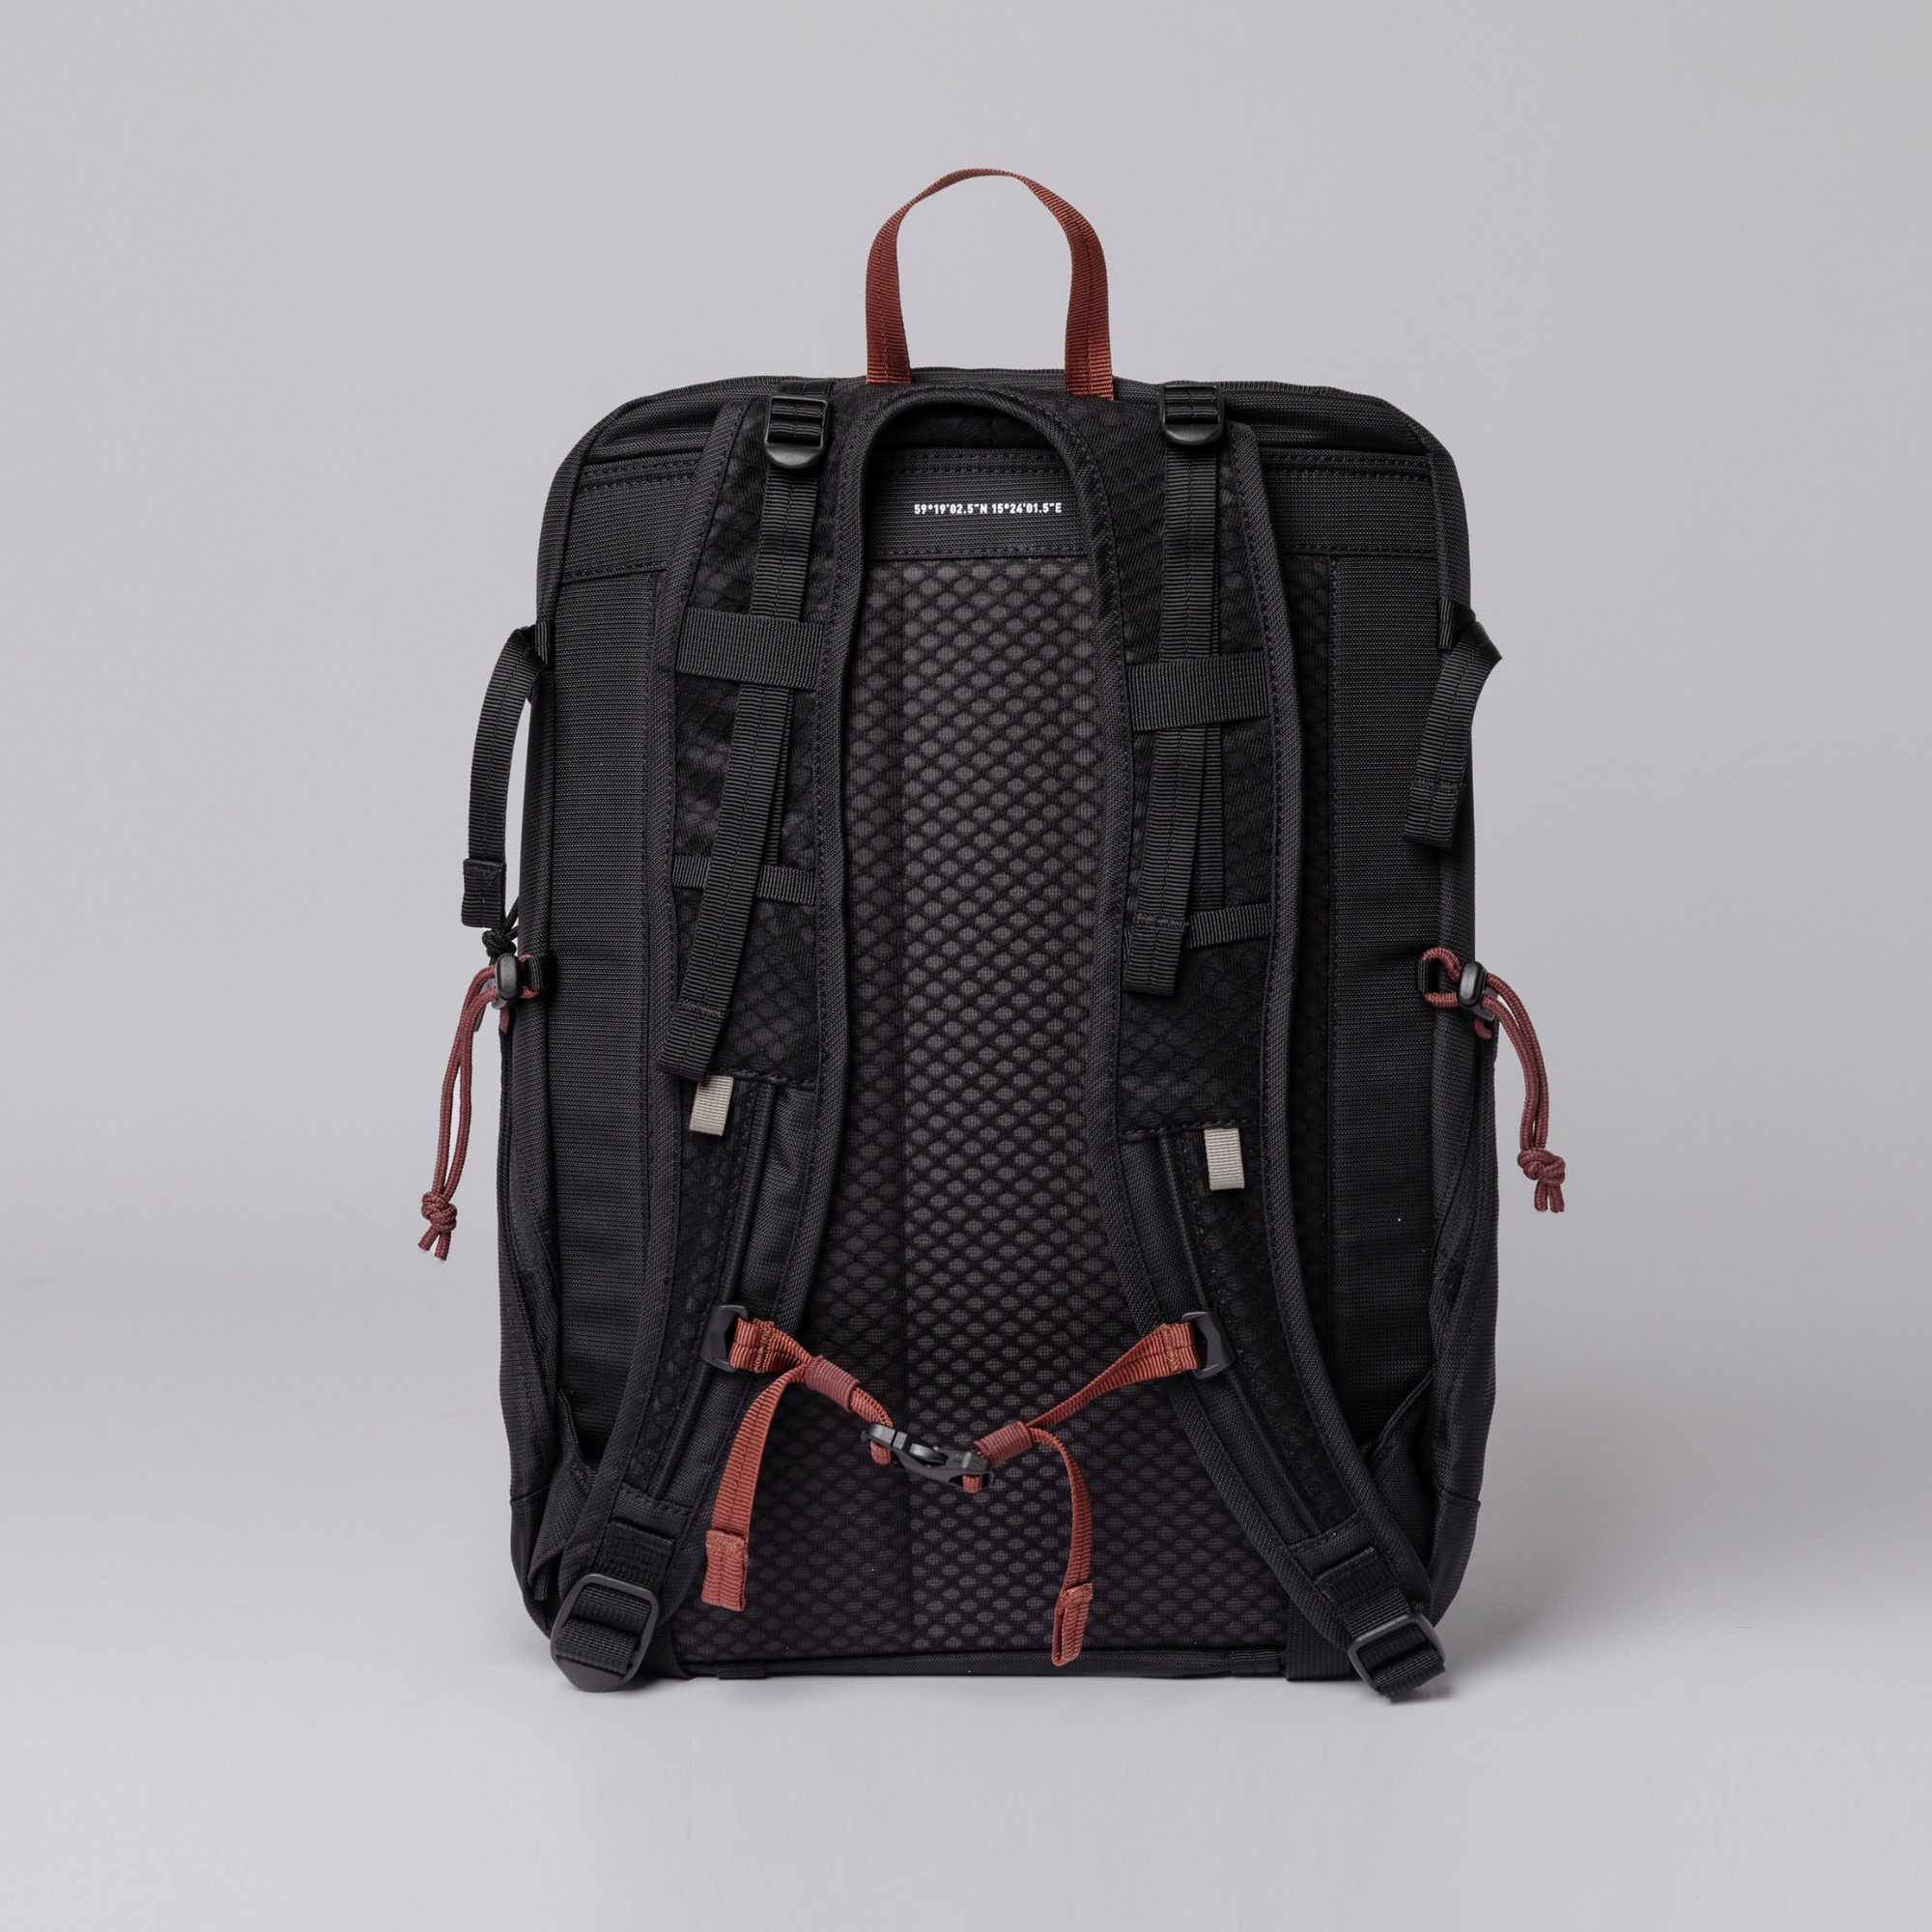 Sandqvist Ridge Hike Backpack in Black SQA2081| Shop from eightywingold an official brand partner for Sandqvist Canada and US. 